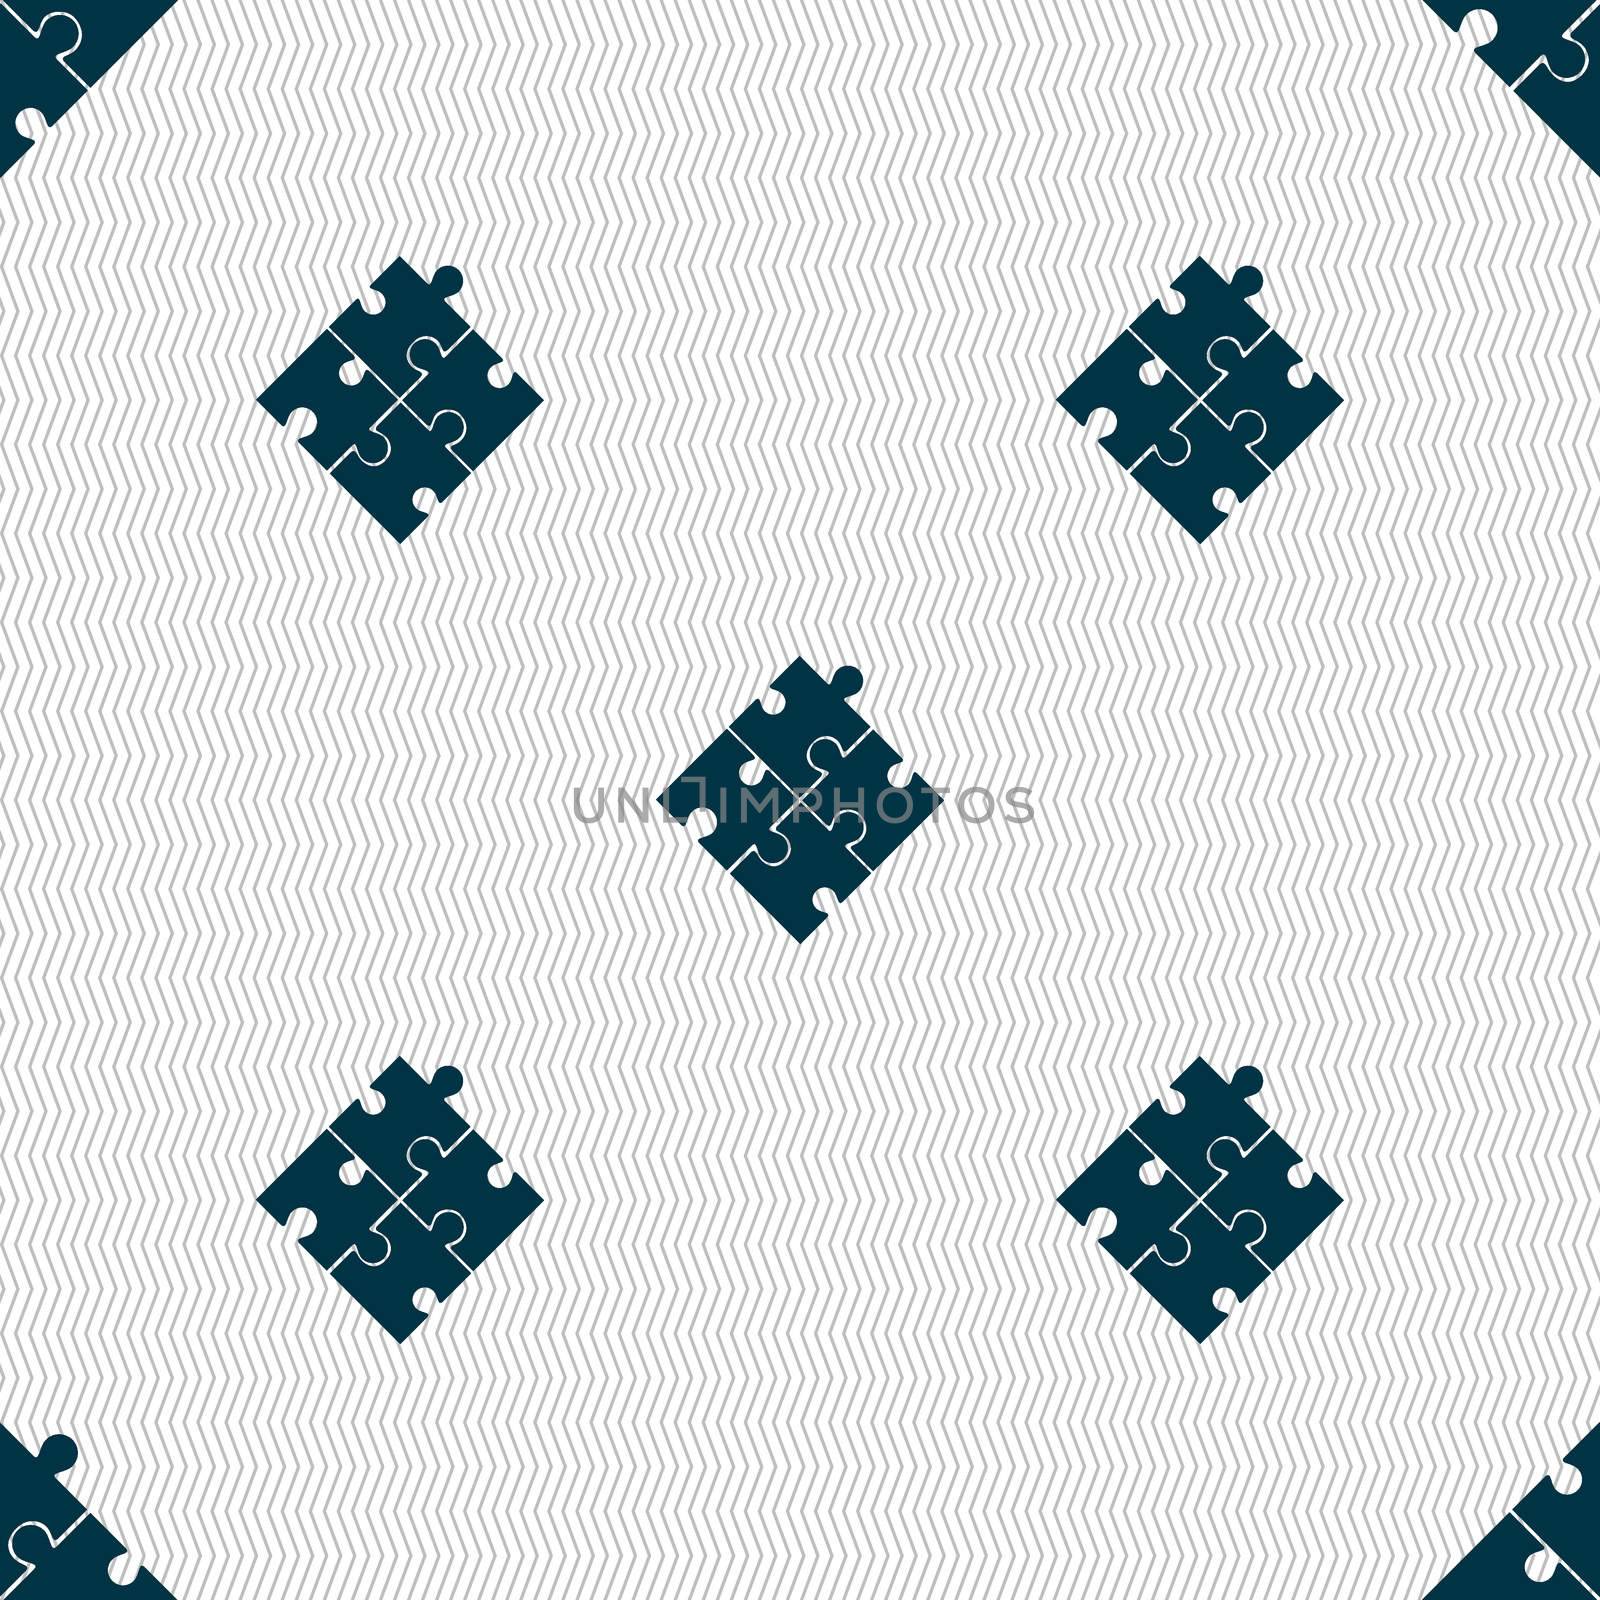 Puzzle piece icon sign. Seamless abstract background with geometric shapes.  by serhii_lohvyniuk